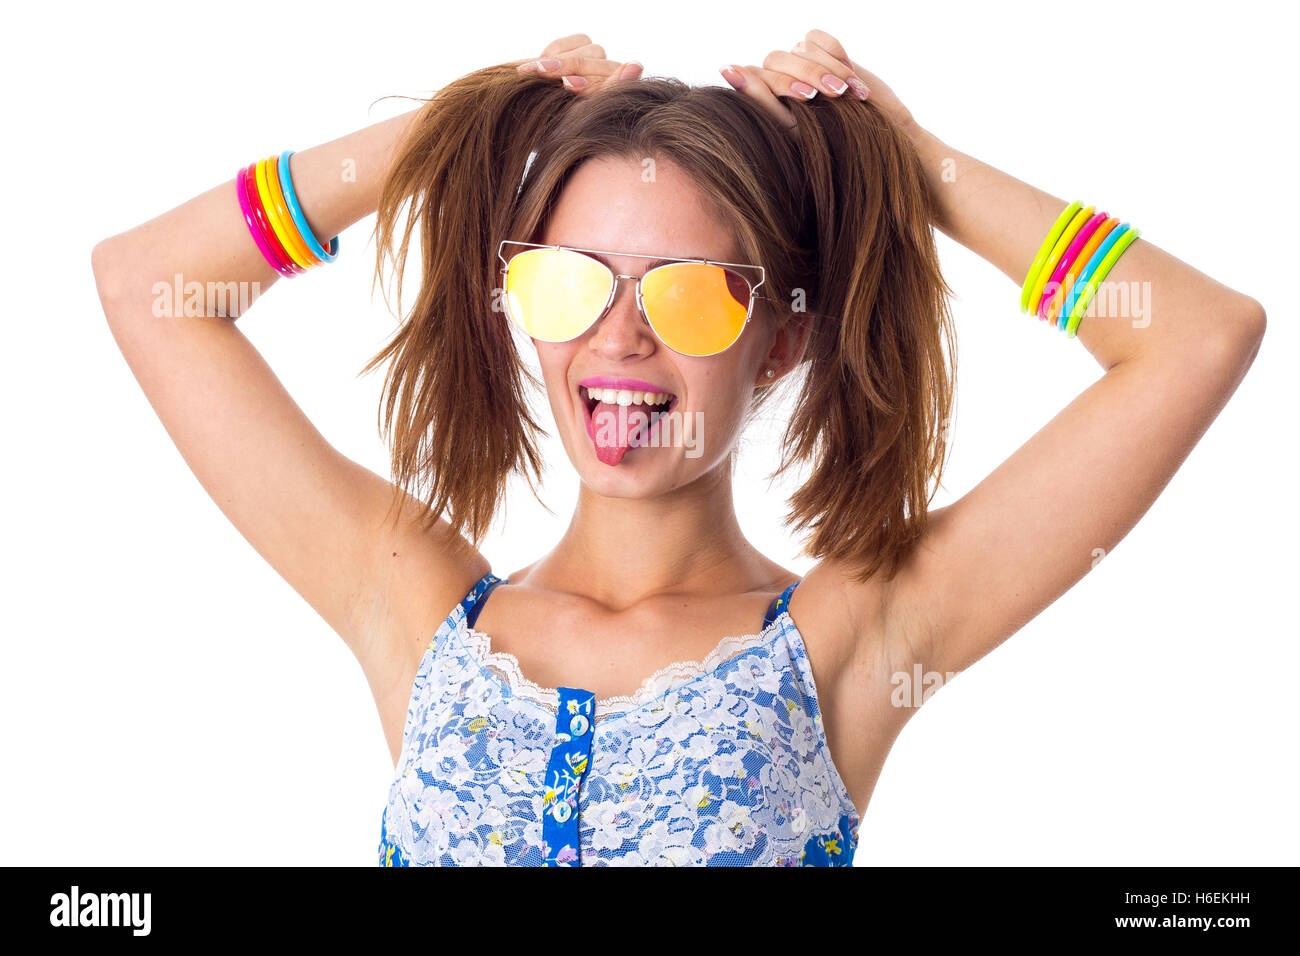 Woman in sunglasses making ponytails and showing tongue Stock Photo